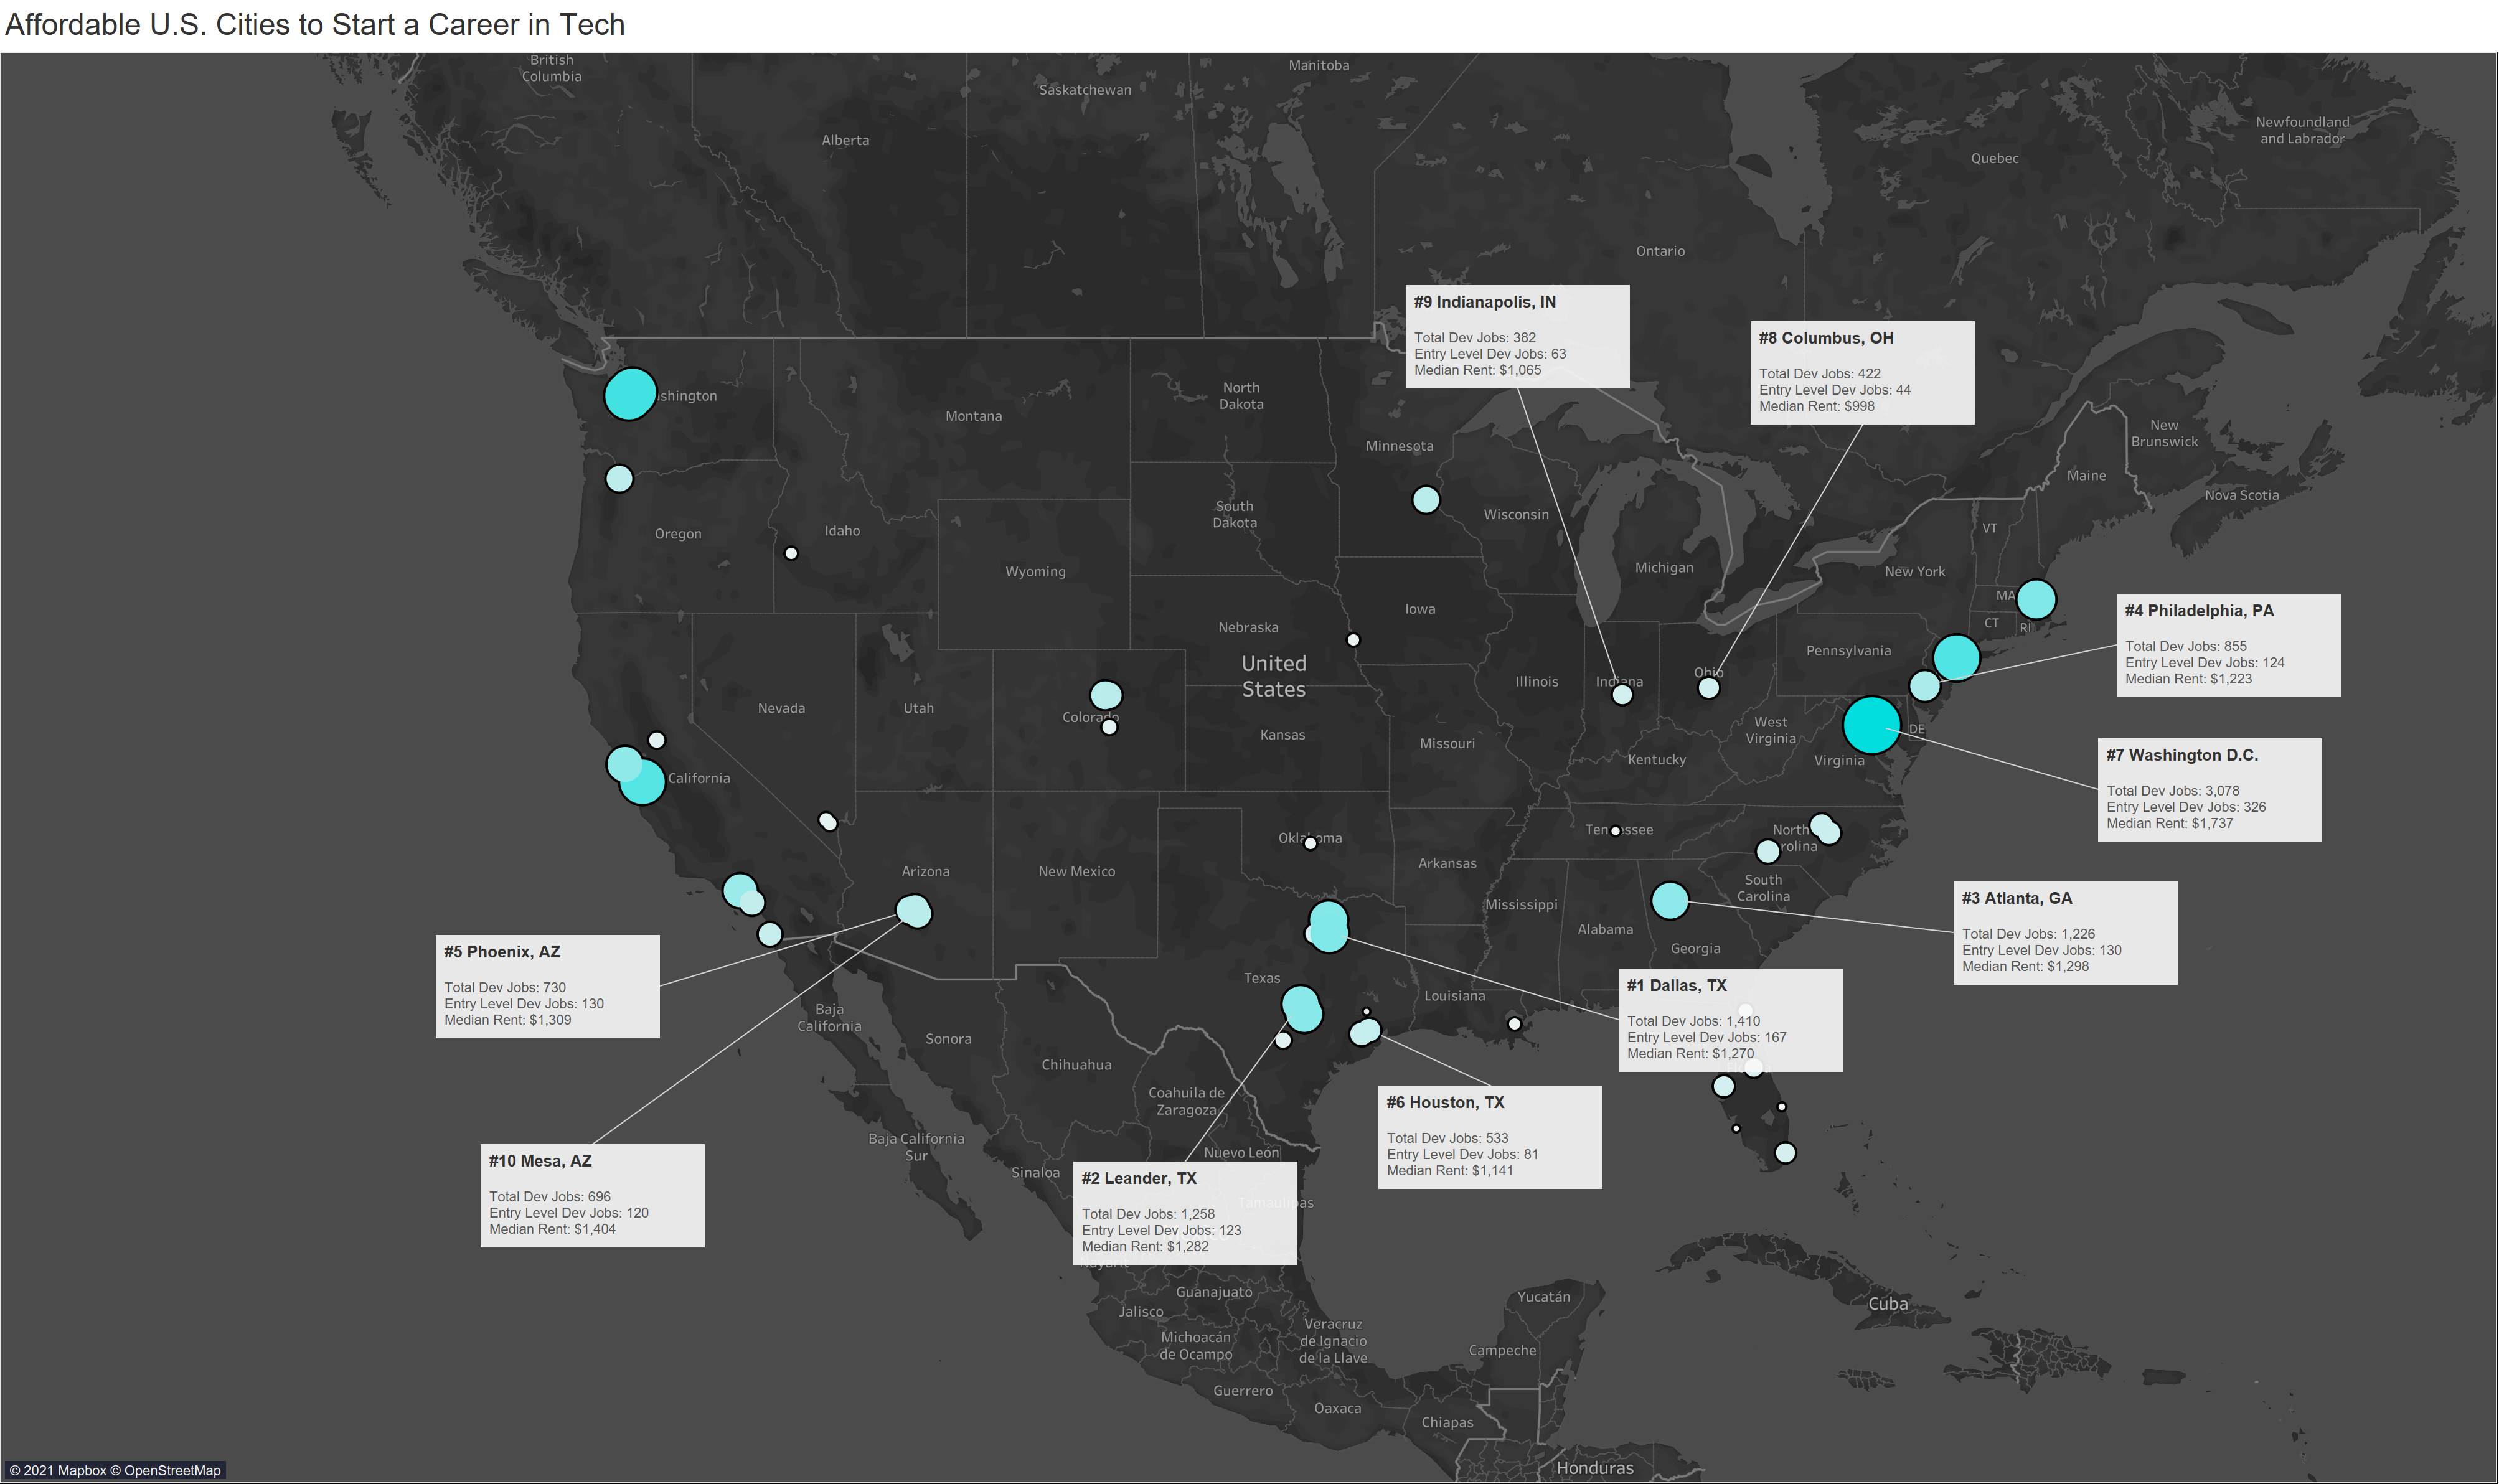 A map highlighting the 10 most affordable cities to start or continue your career in tech